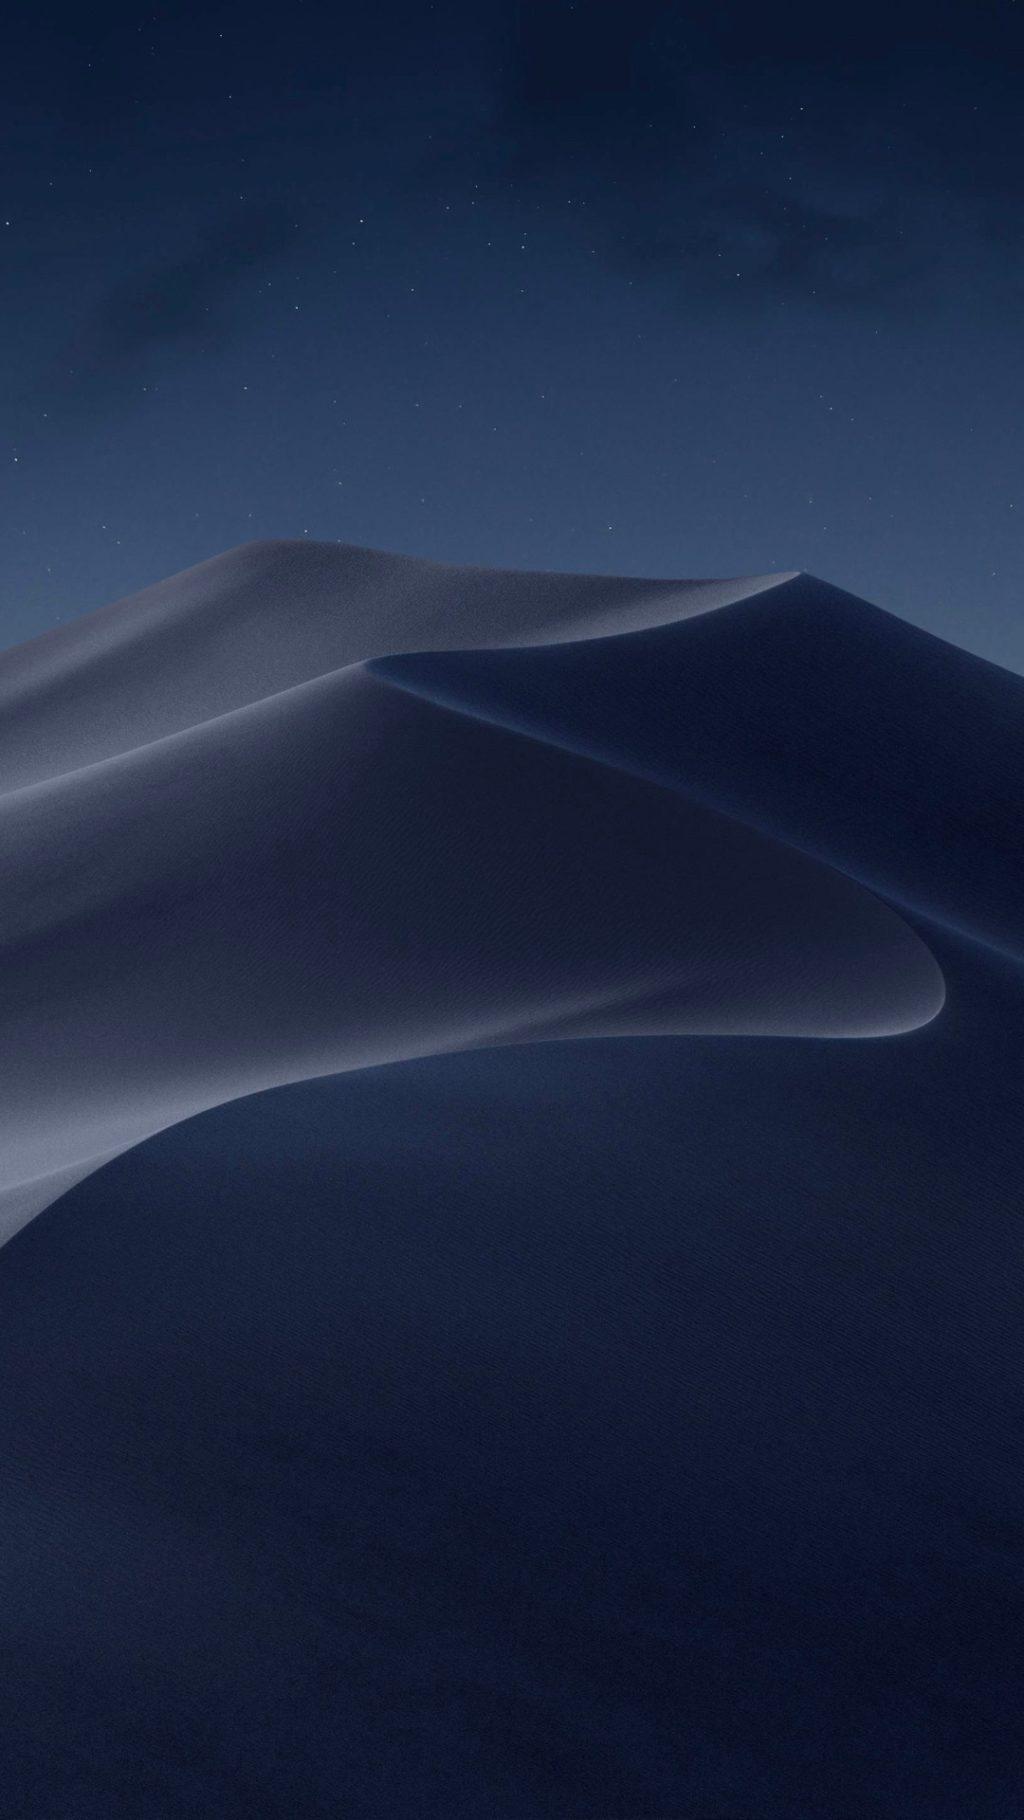 Wallpaper Wednesday: macOS Mojave Wallpaper for iPhone, iPad